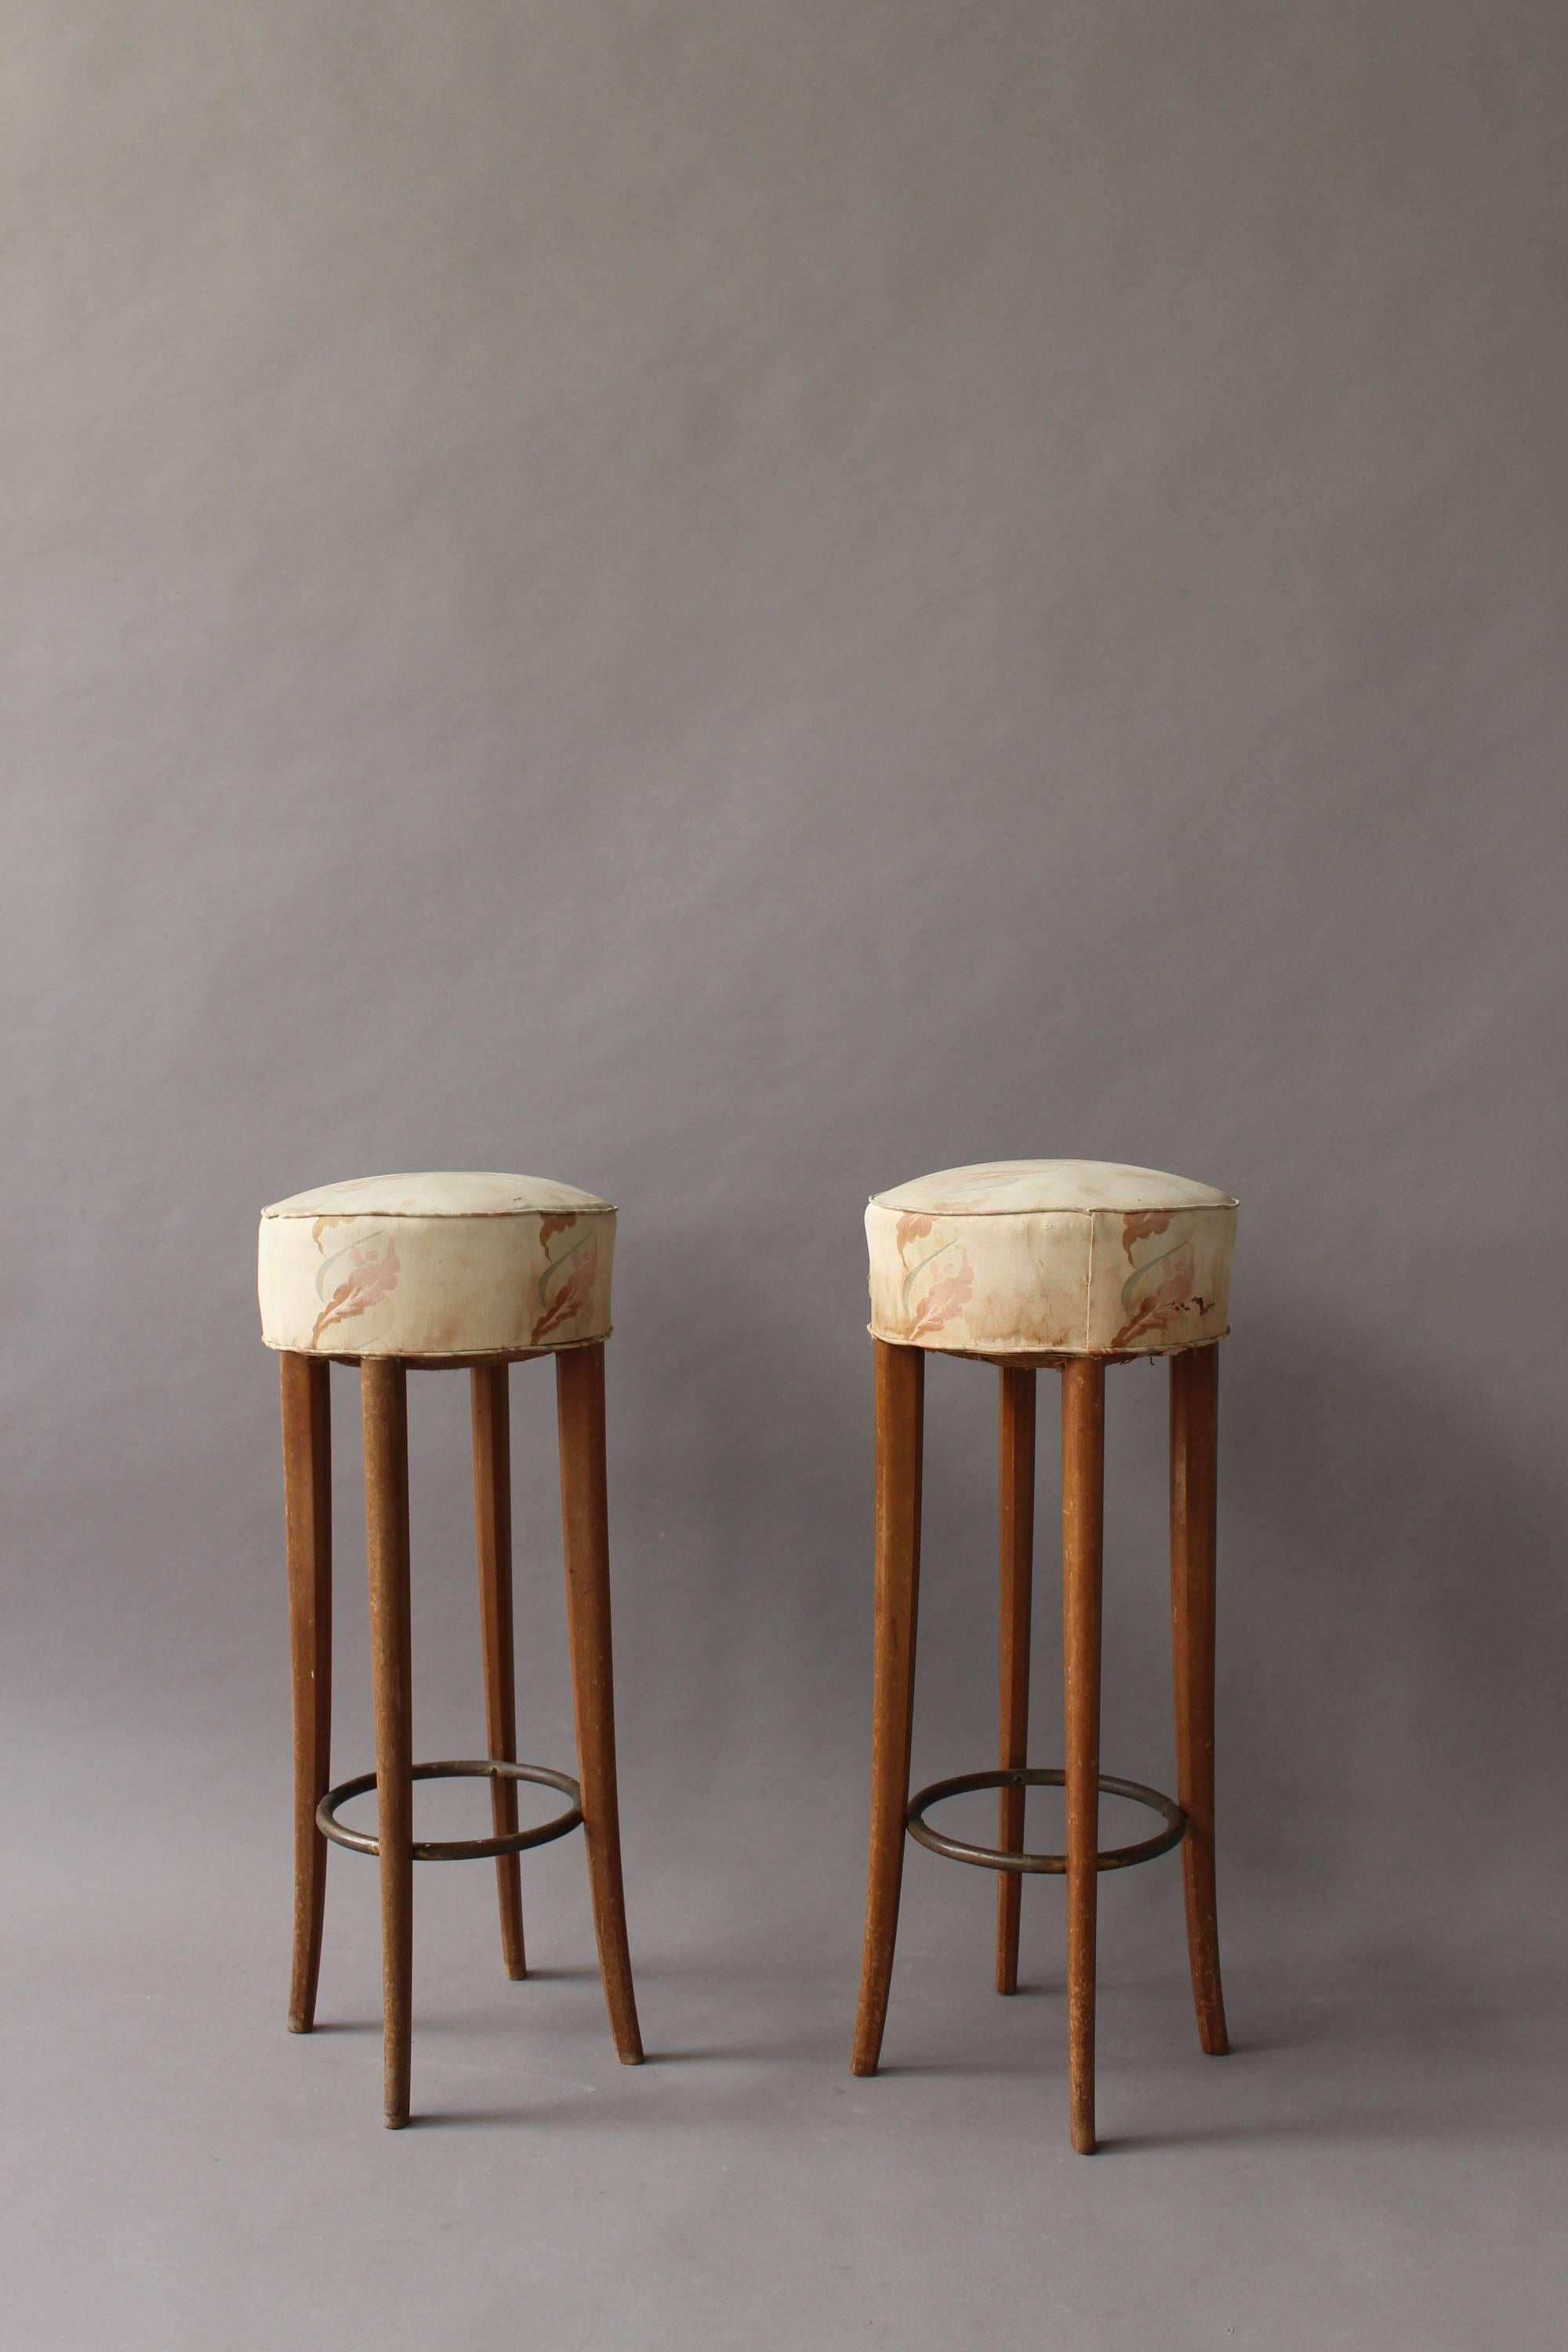 A pair of fine French Art Deco bar stools with patina-ed brass footrest.